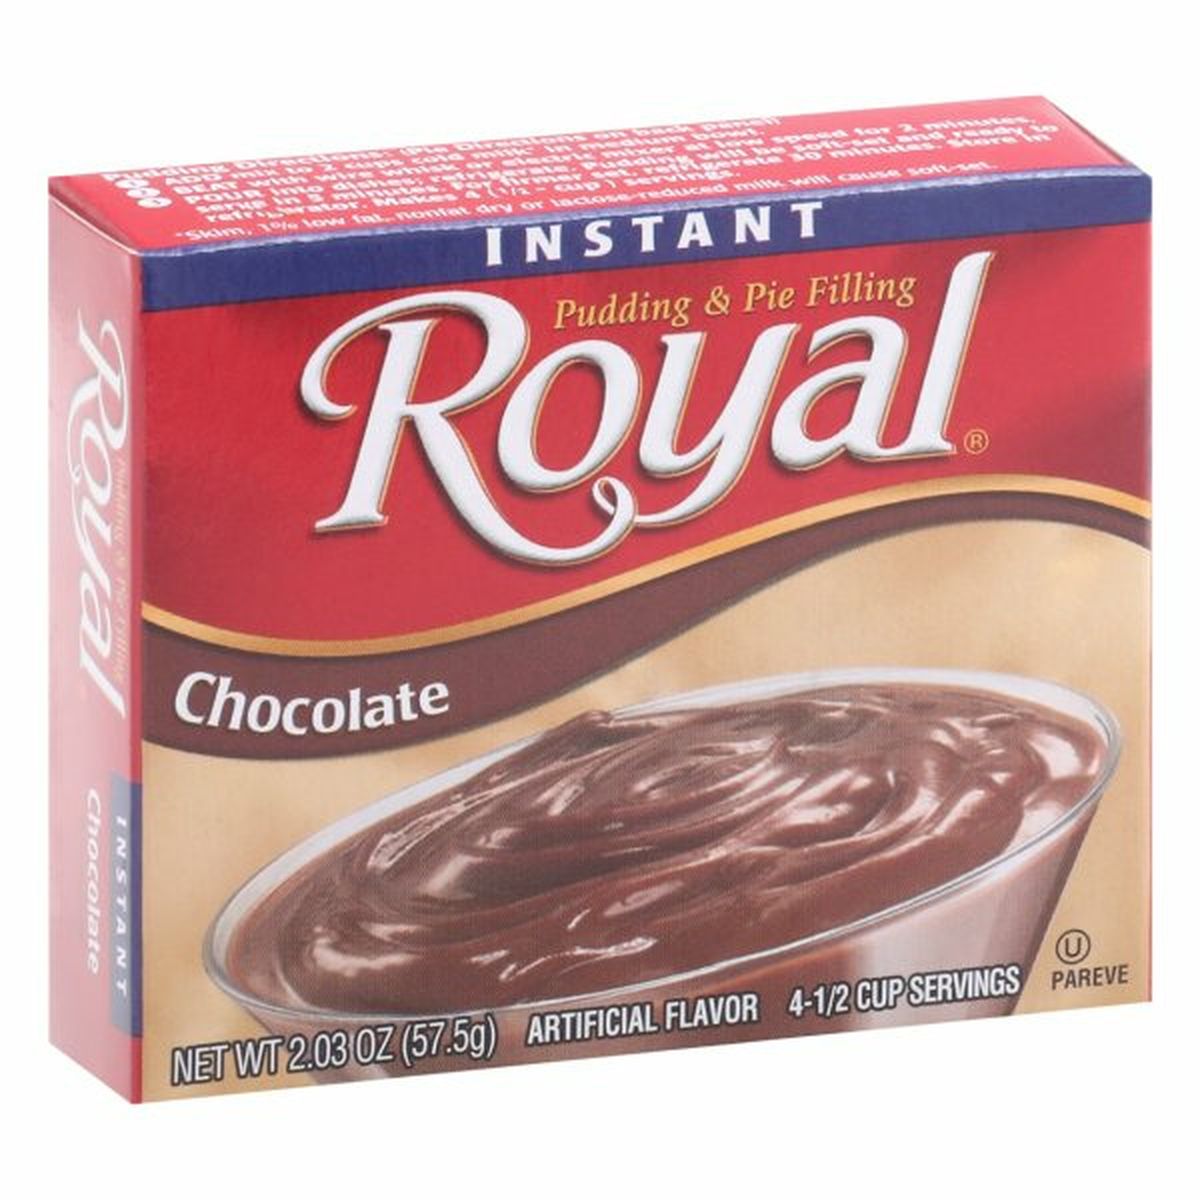 Calories in Royal Pudding & Pie Filling, Chocolate, Instant